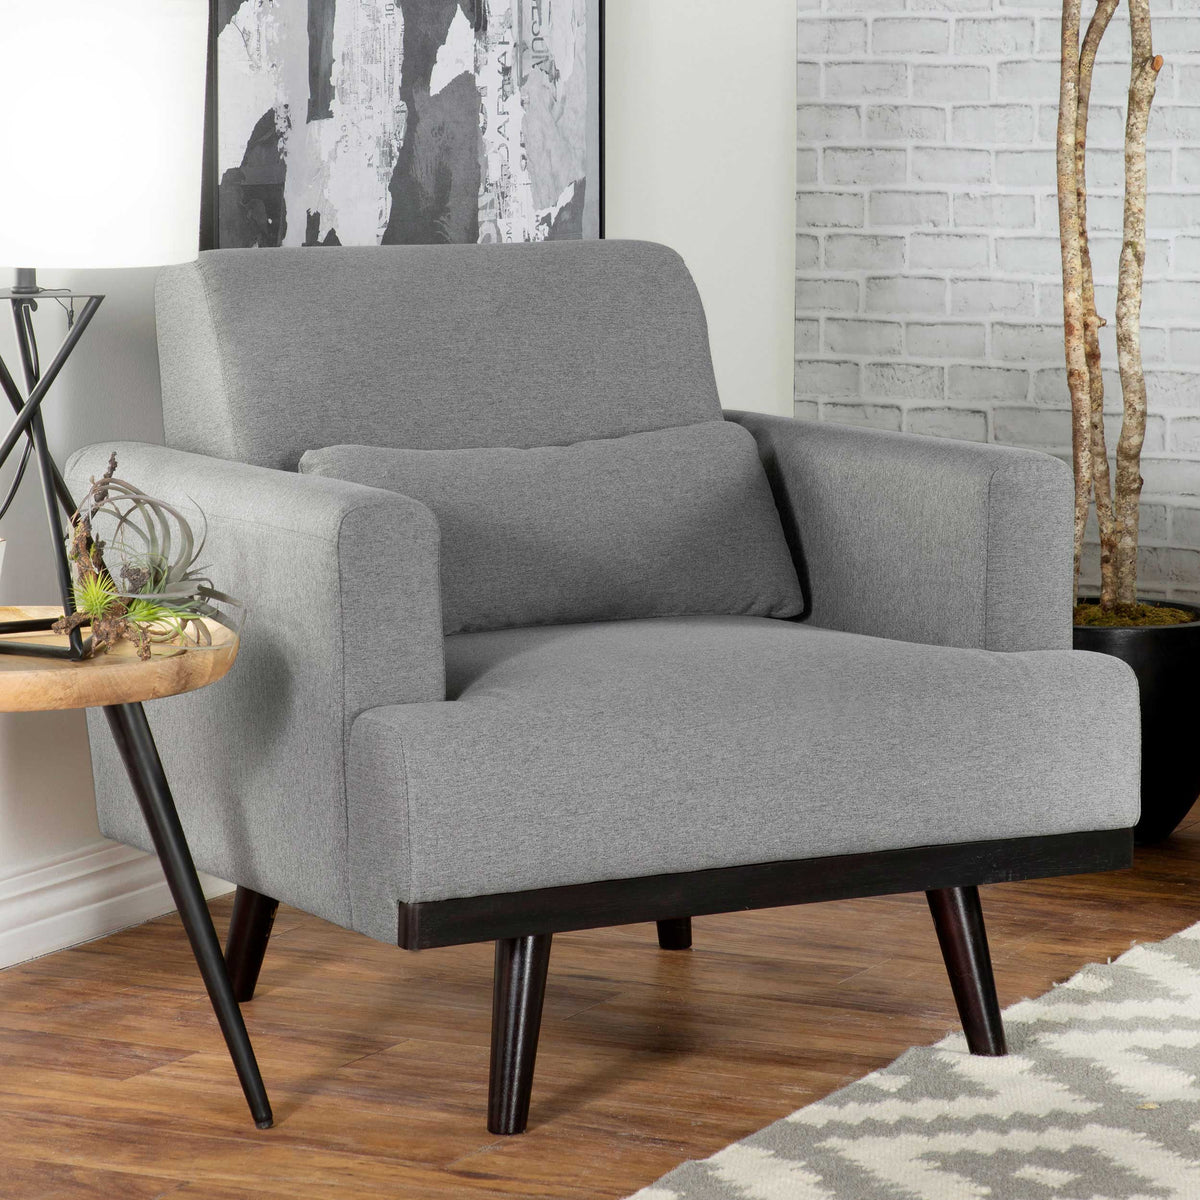 Blake Upholstered Chair with Track Arms Sharkskin and Dark Brown  Half Price Furniture